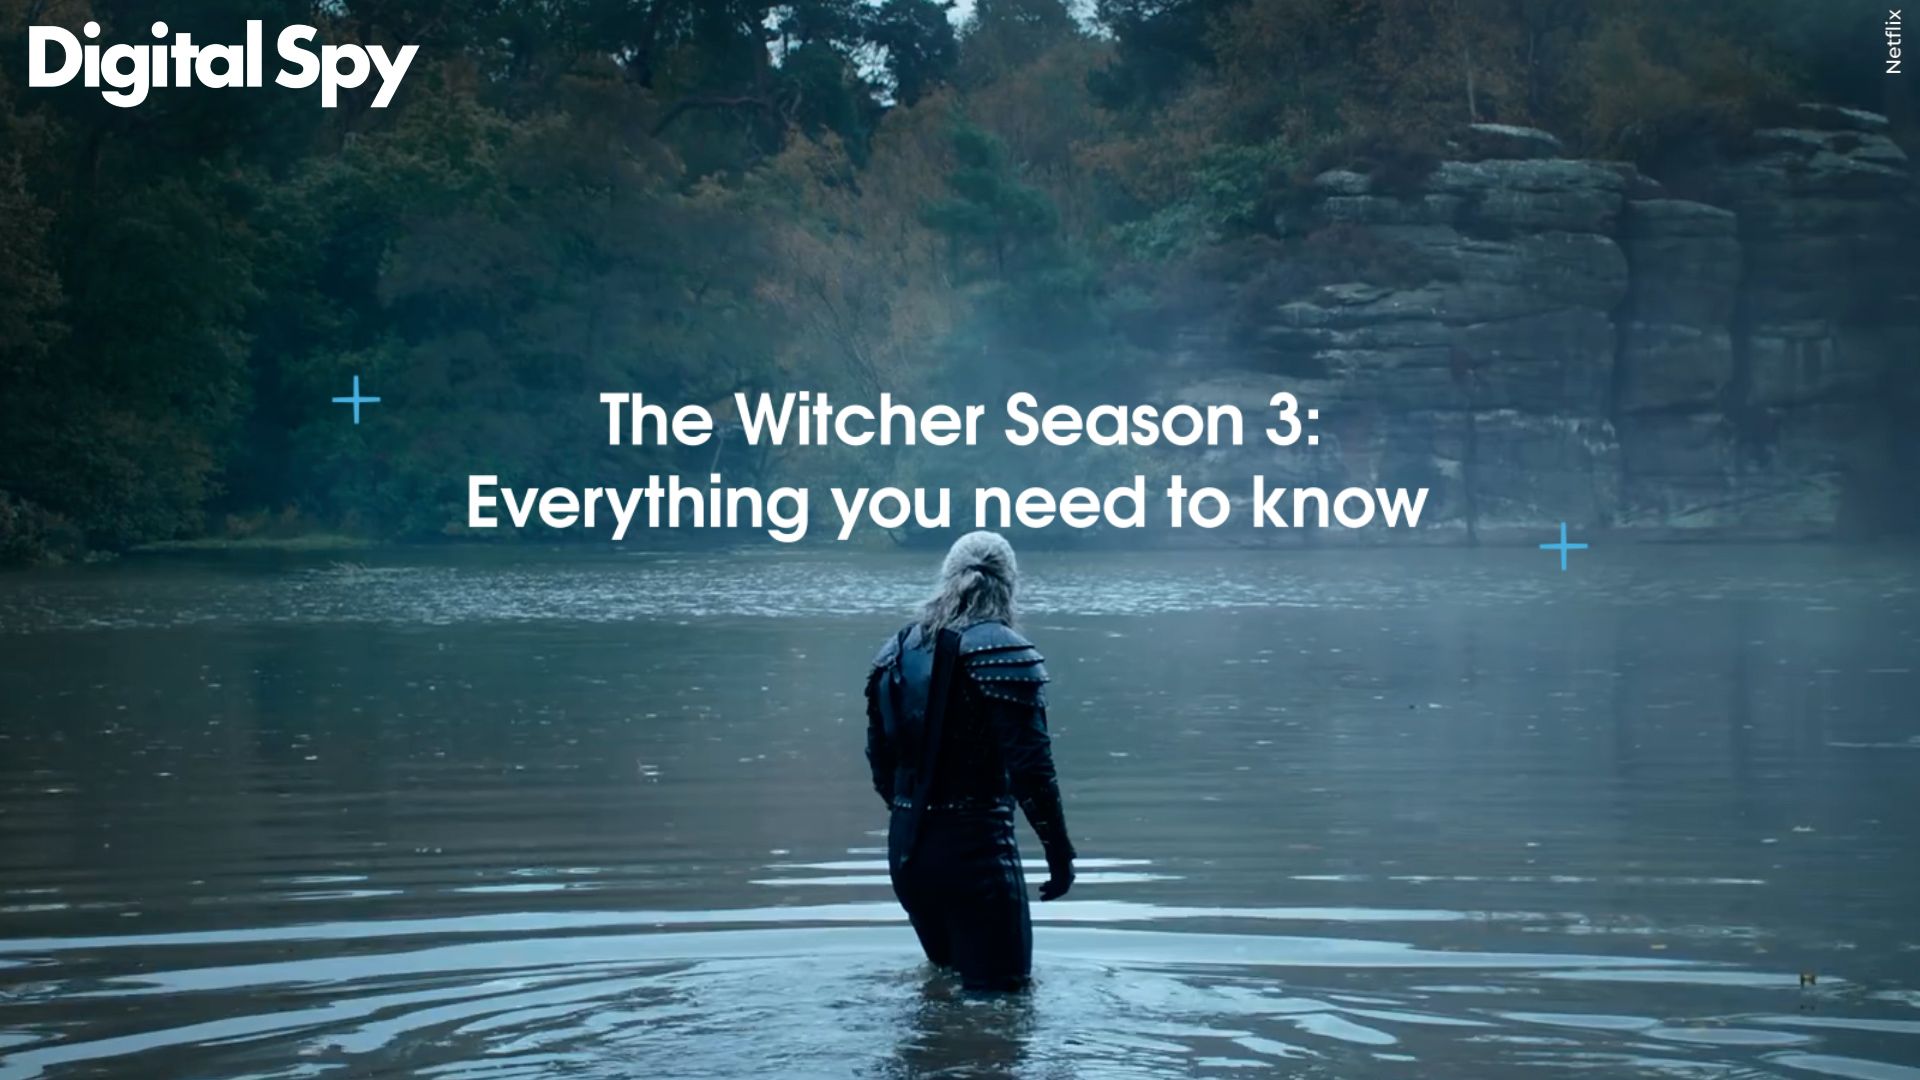 The Witcher Season 3, Part 2 Release Date, Story & Everything We Know